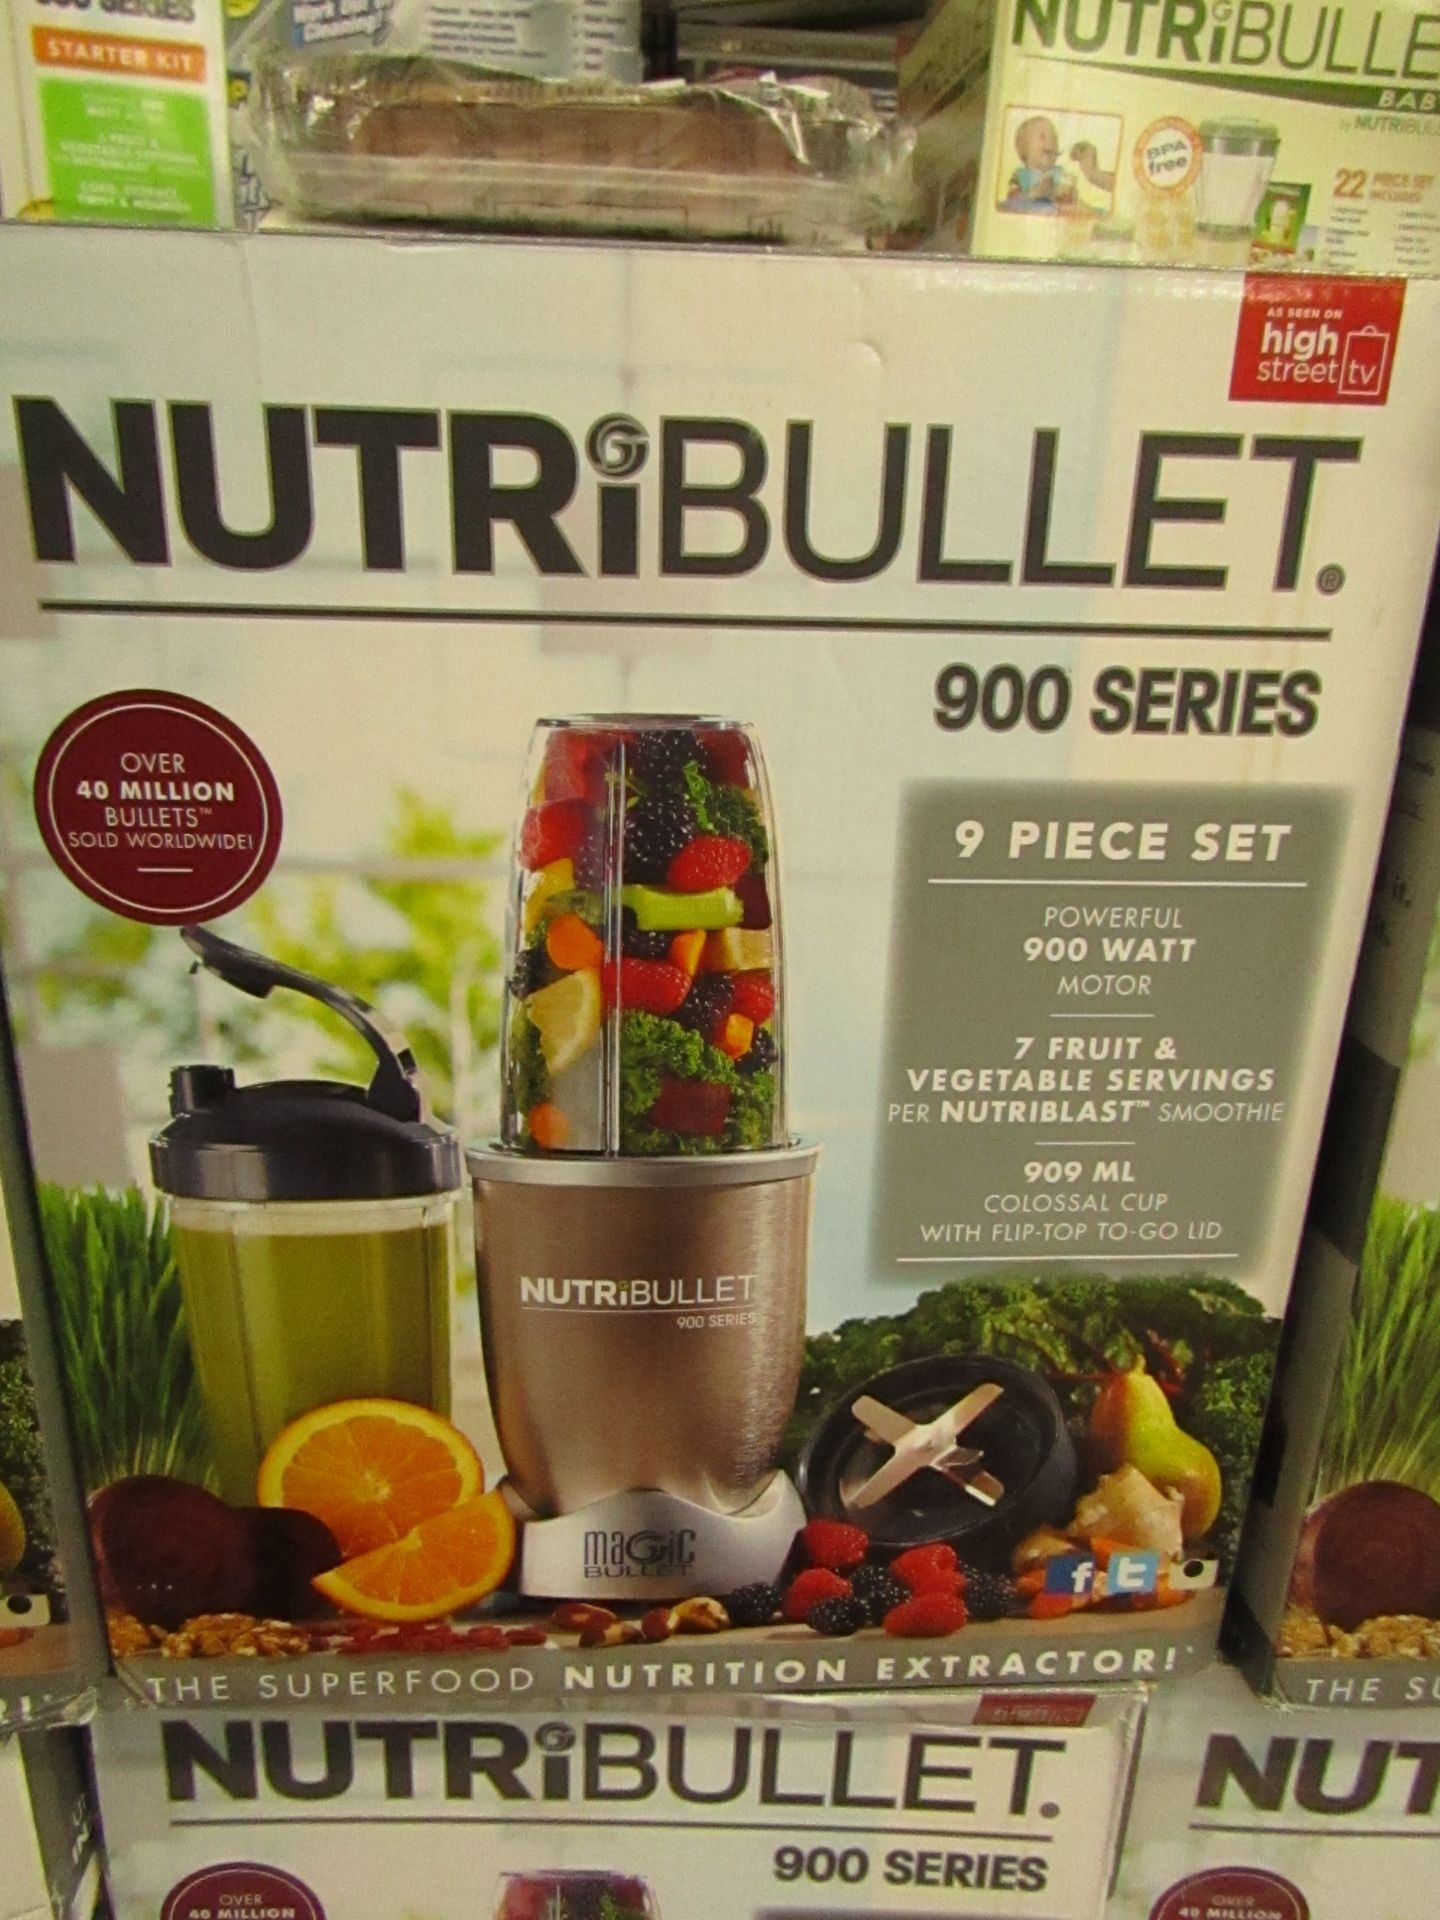 | 1x | NutriBullet 900 Series | unchecked and boxed | no online re-sale | SKU C5060191467353 |